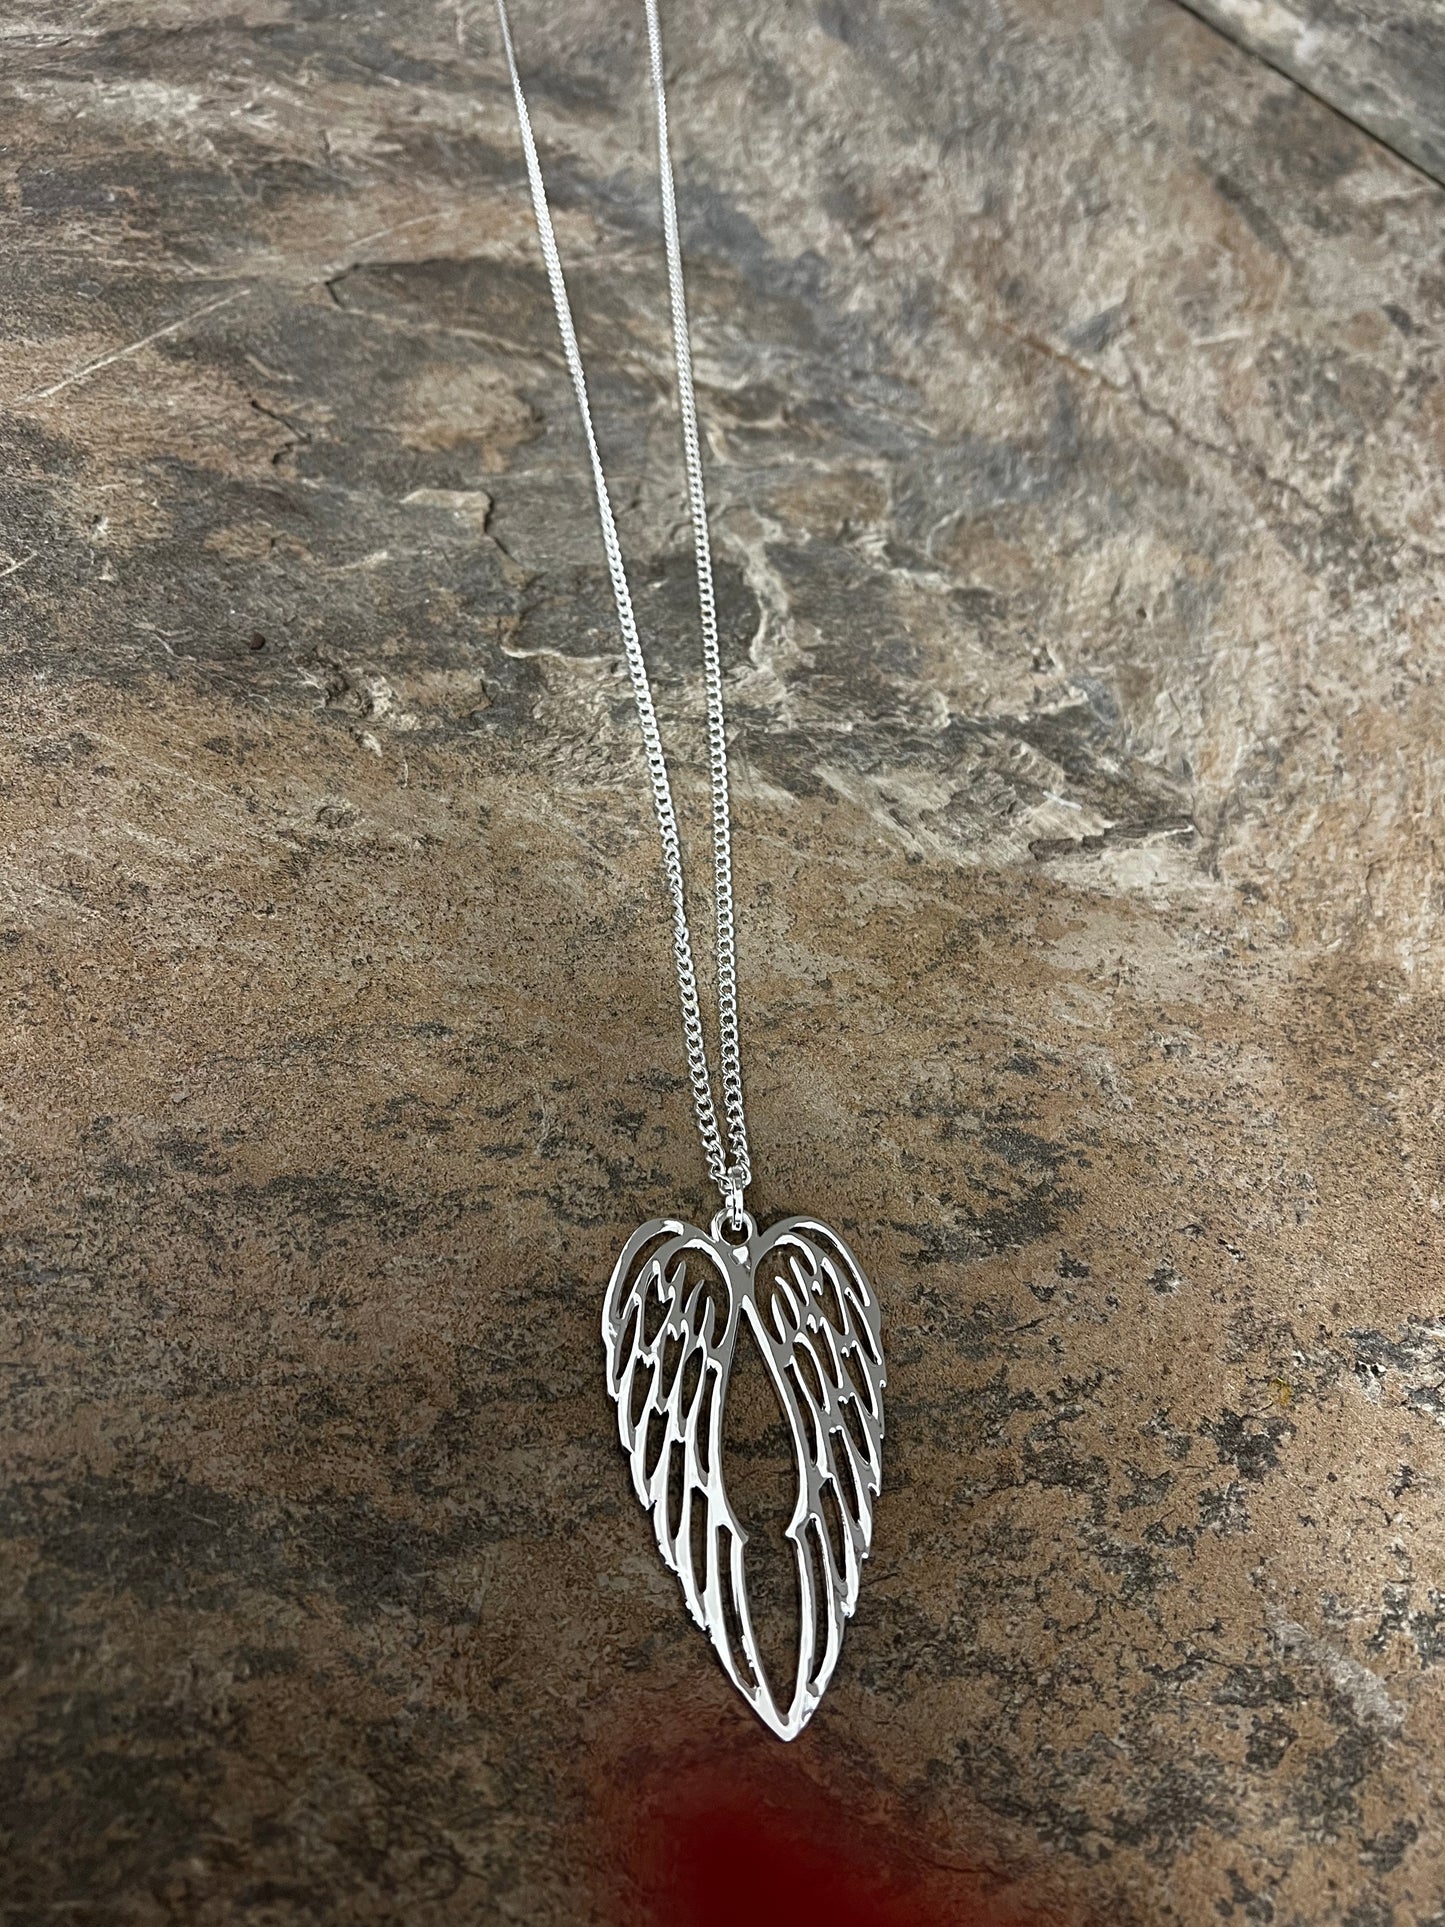 Silver angel wings necklace